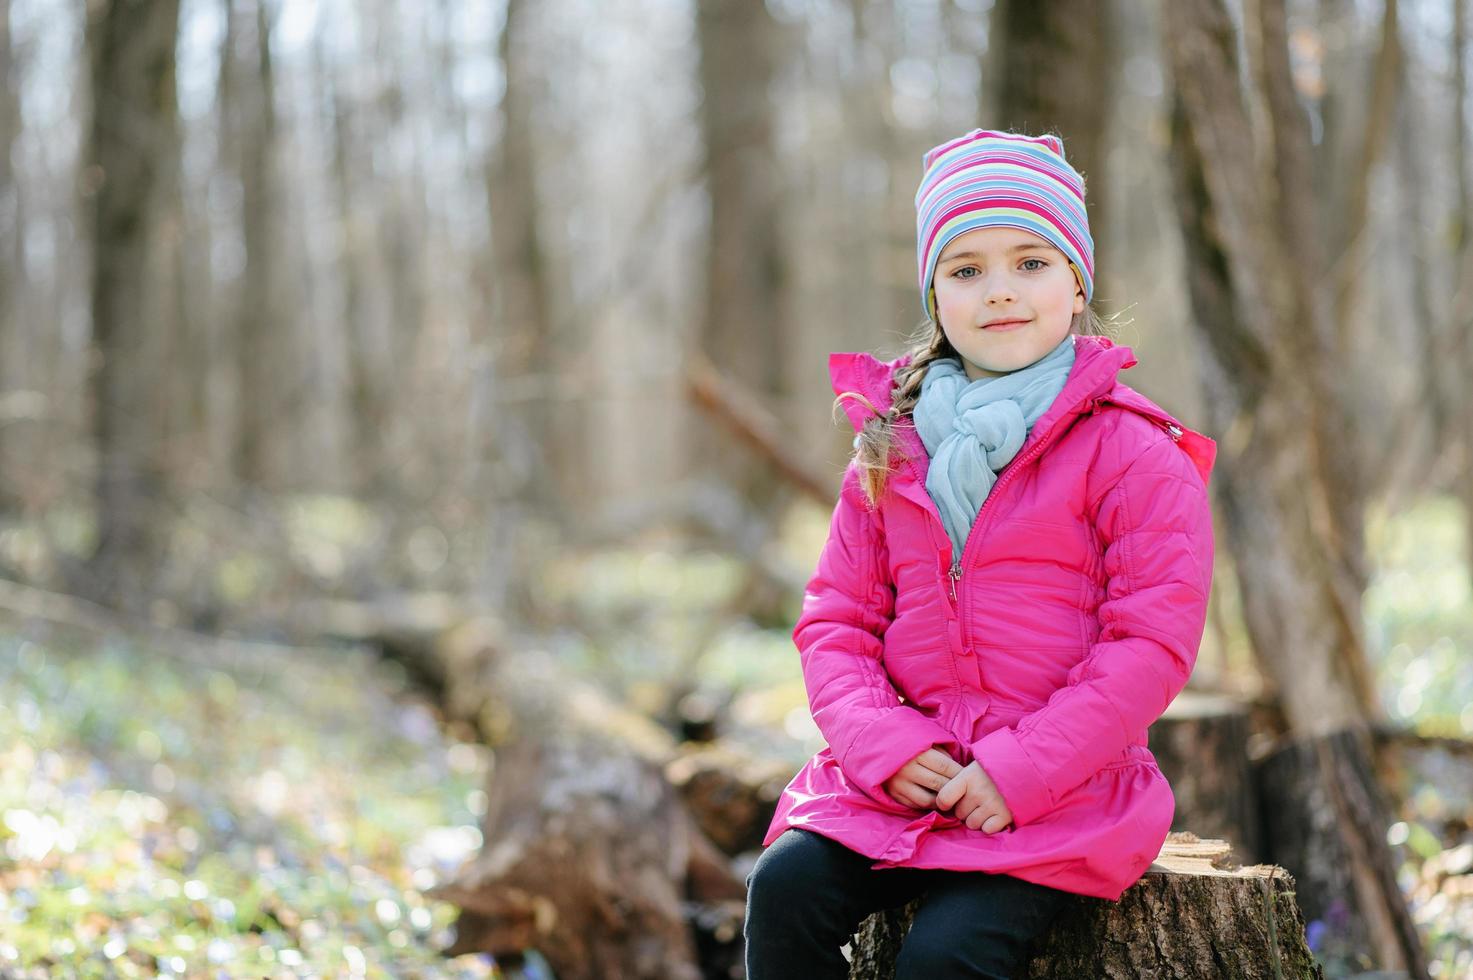 Little girl in the forest photo